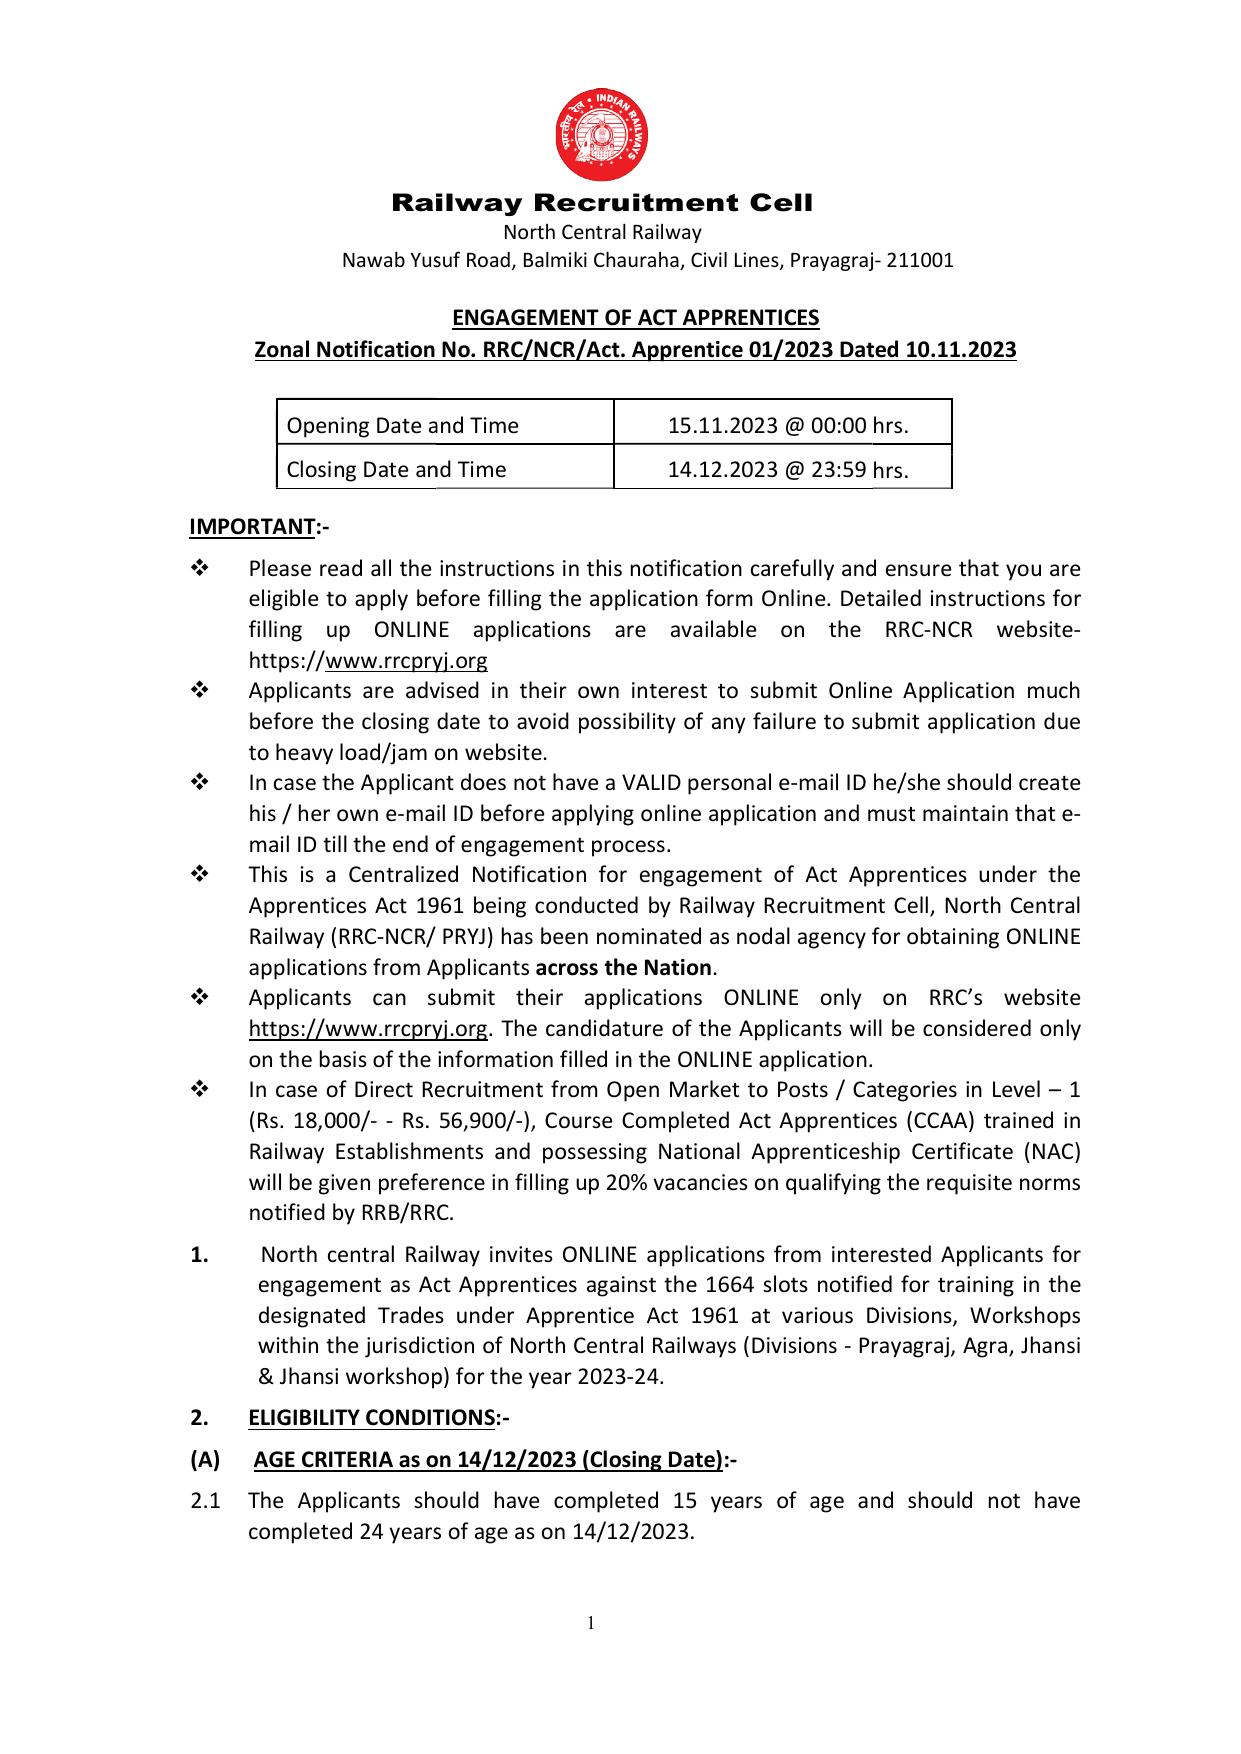 North Central Railway (NCR) Apprentice Recruitment 2023 - Page 2